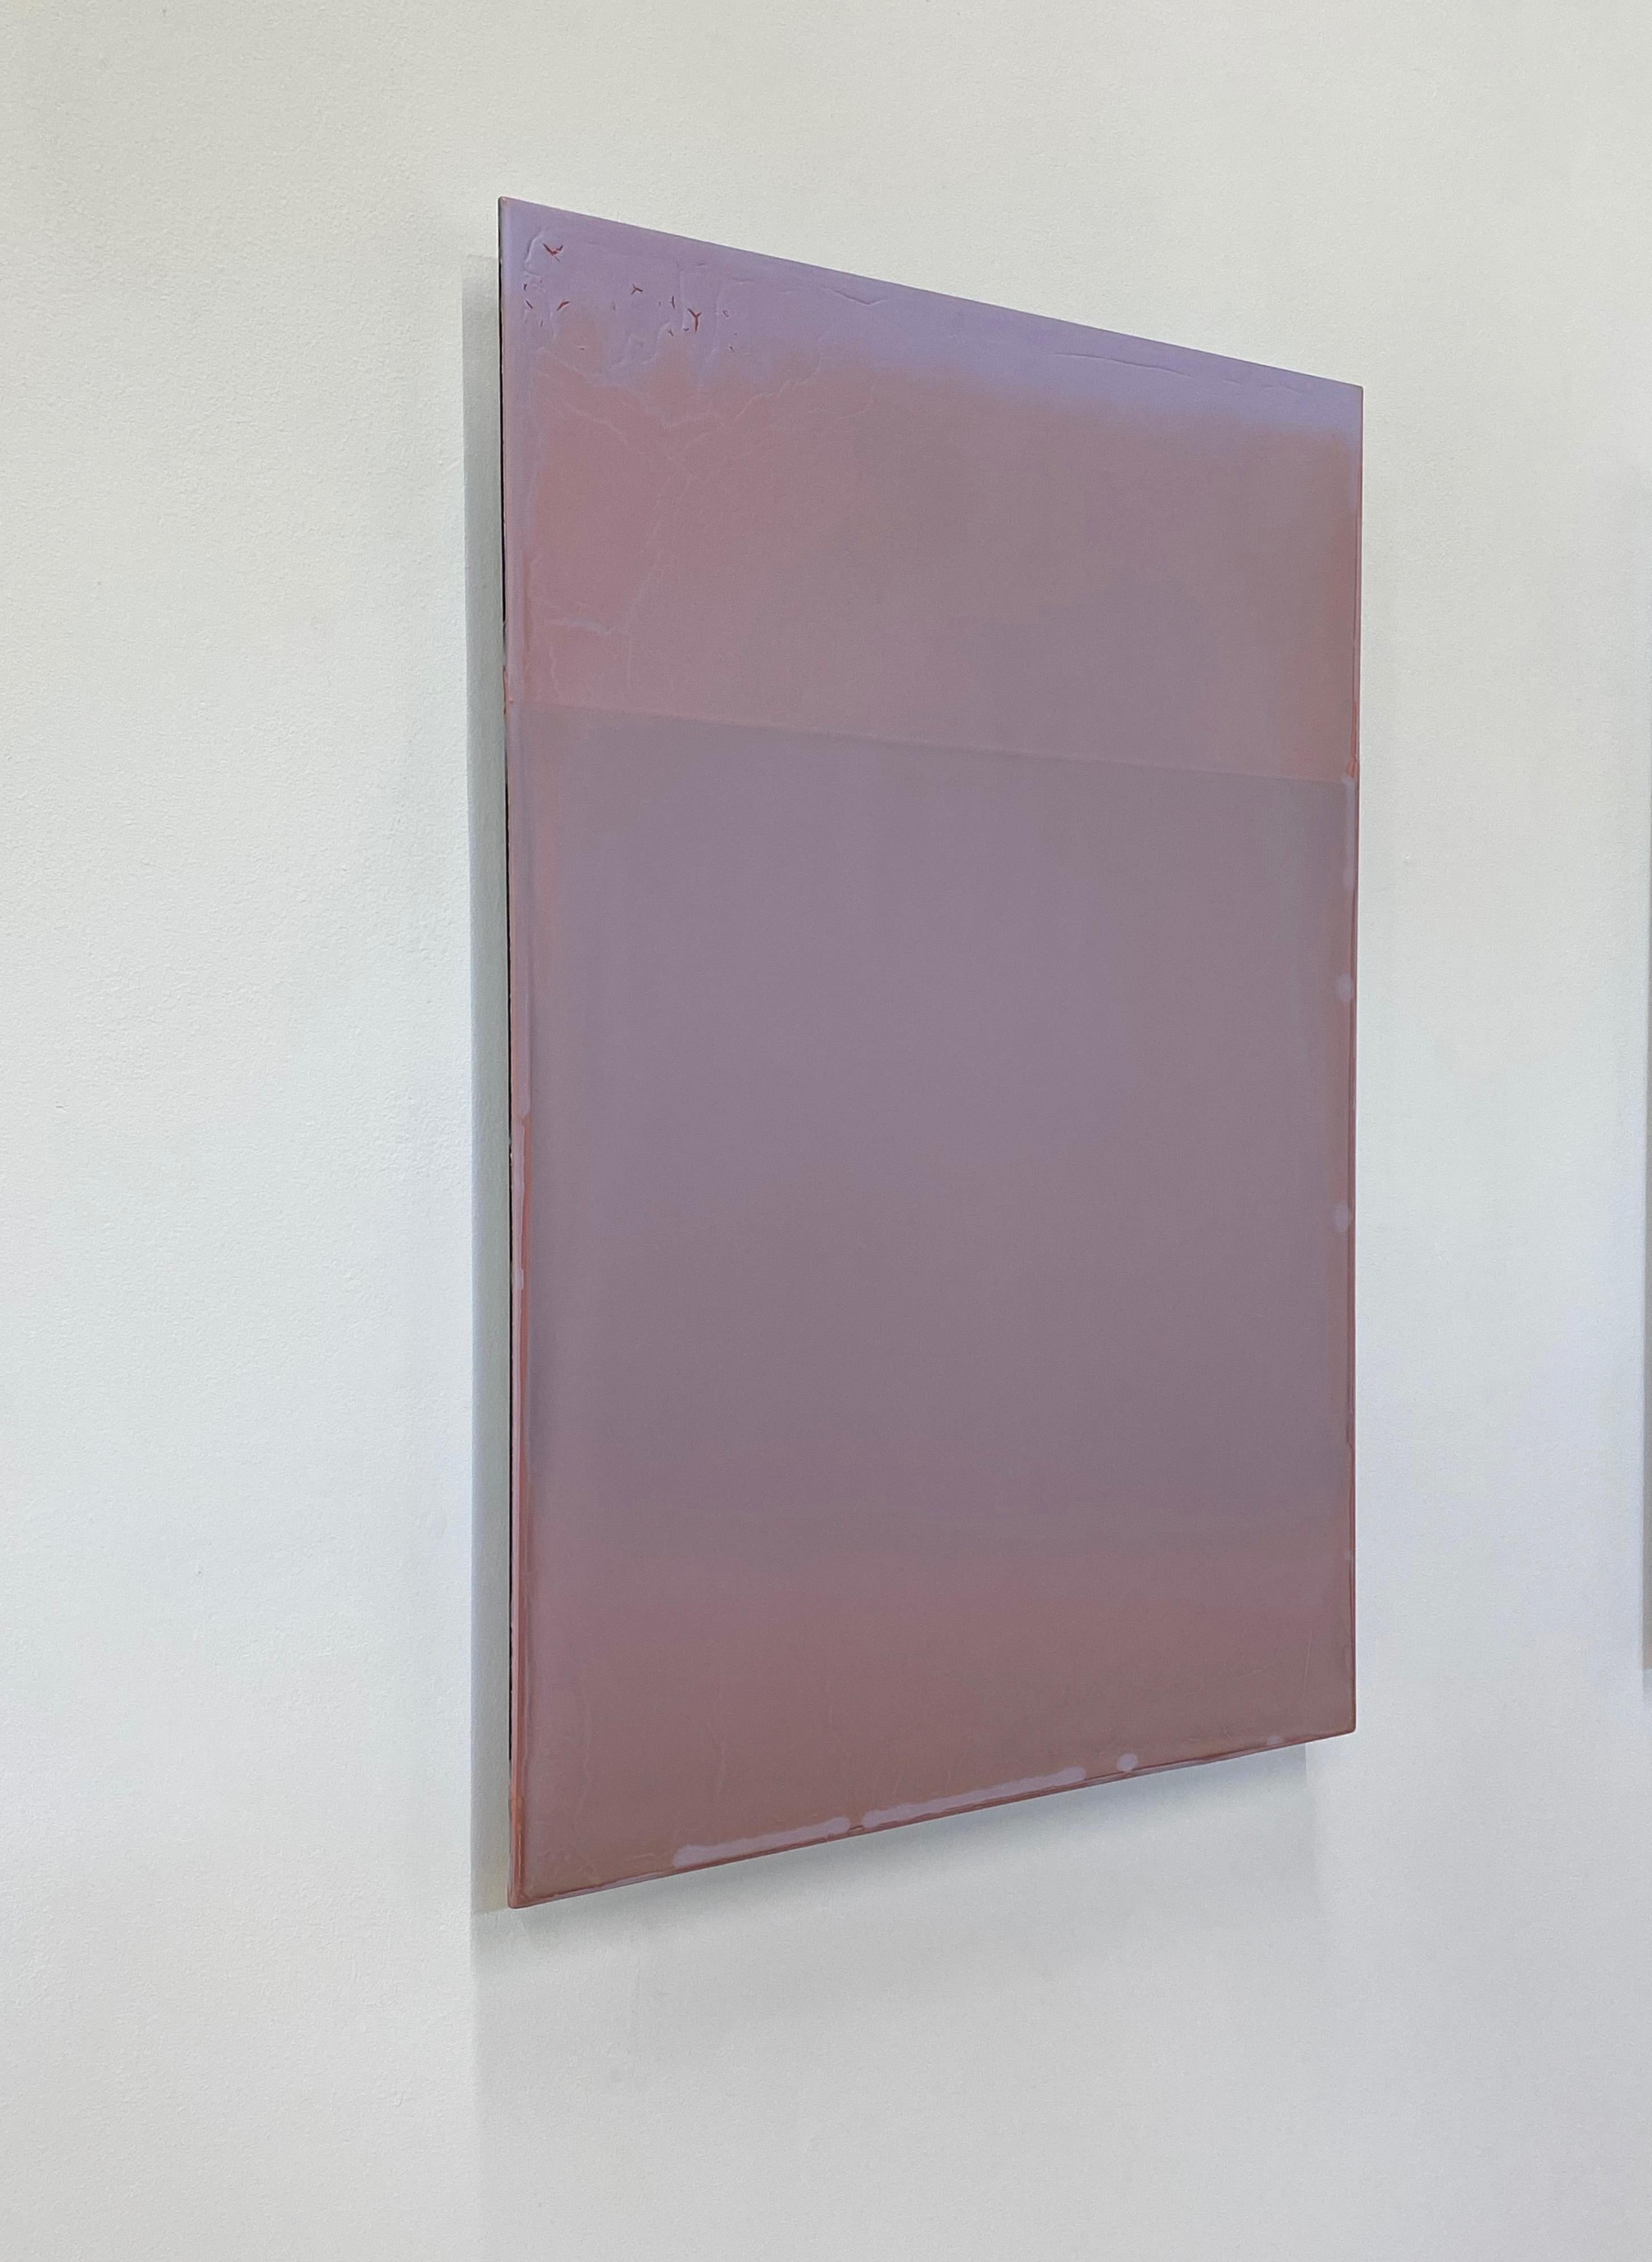 Weather No. 2 by Susan English is a wonderful play of color, light, and composition. The layers of English's tinted polymer on aluminum create the depth and surface textures throughout the painting. The pale pink hue fades to soft lavender lilac at